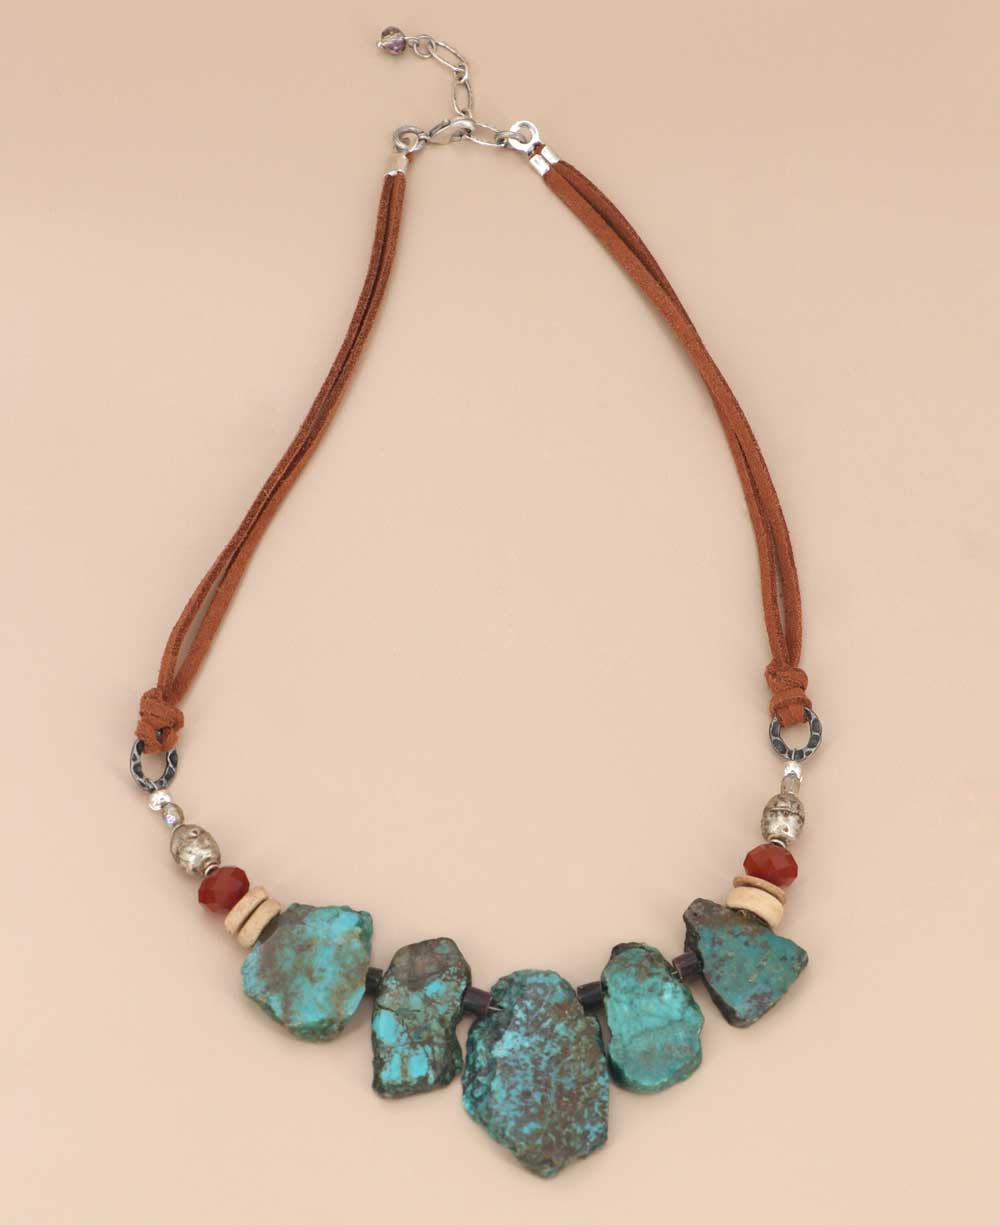 Turquoise nugget statement necklace